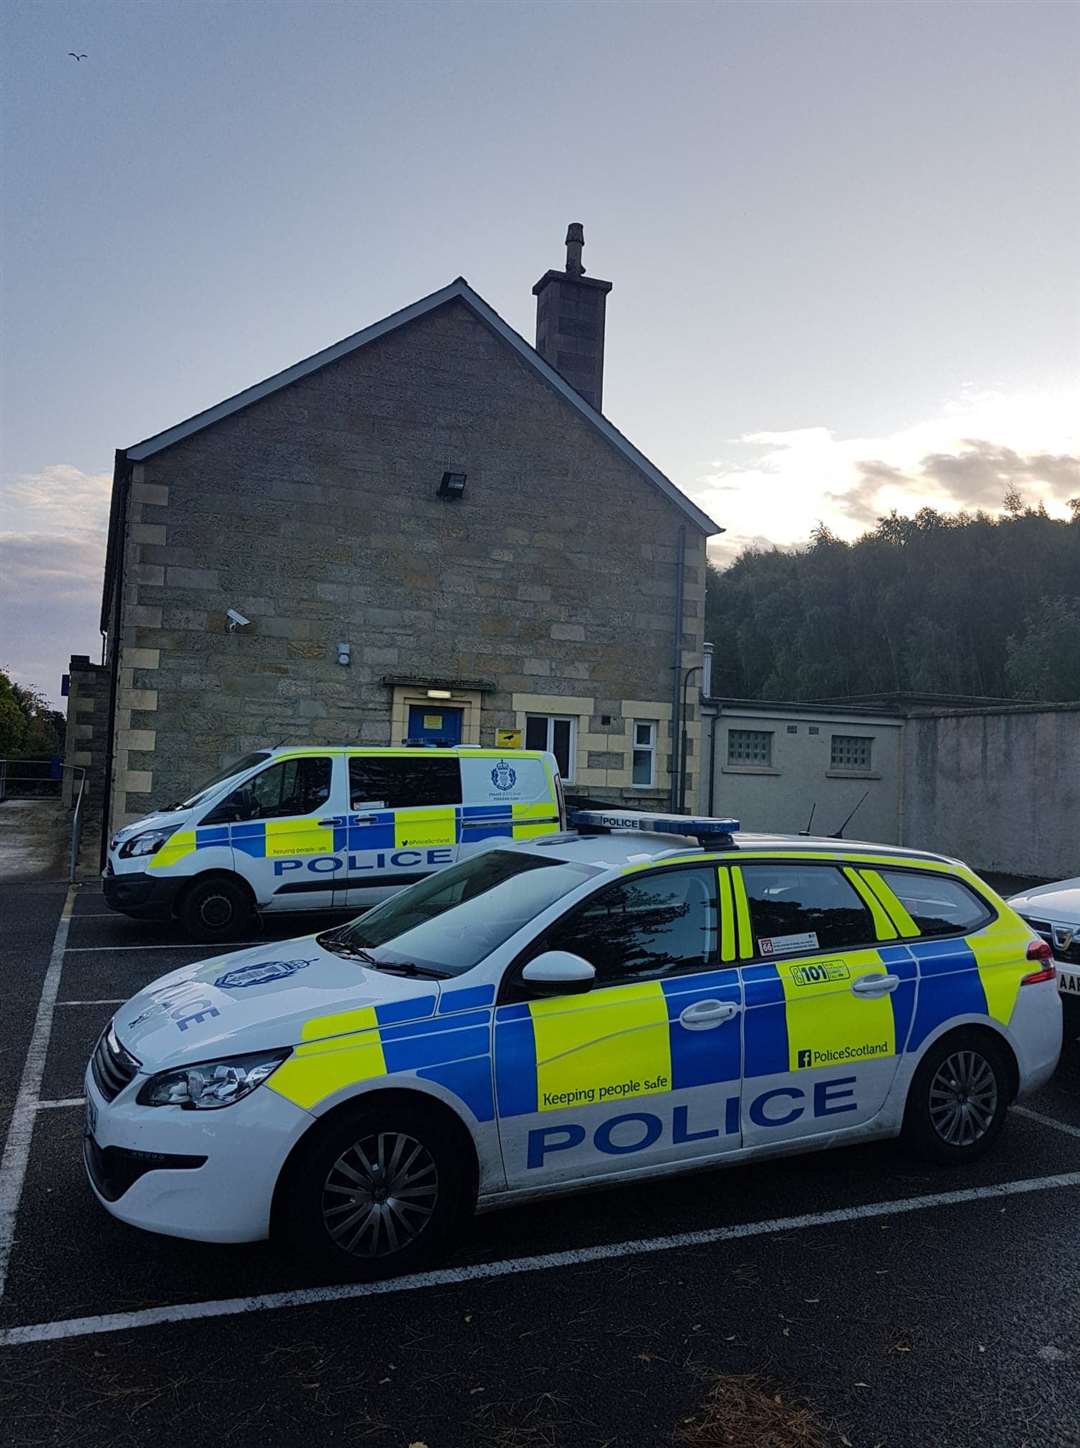 Forres Police Station is open to the public five days-a-week.